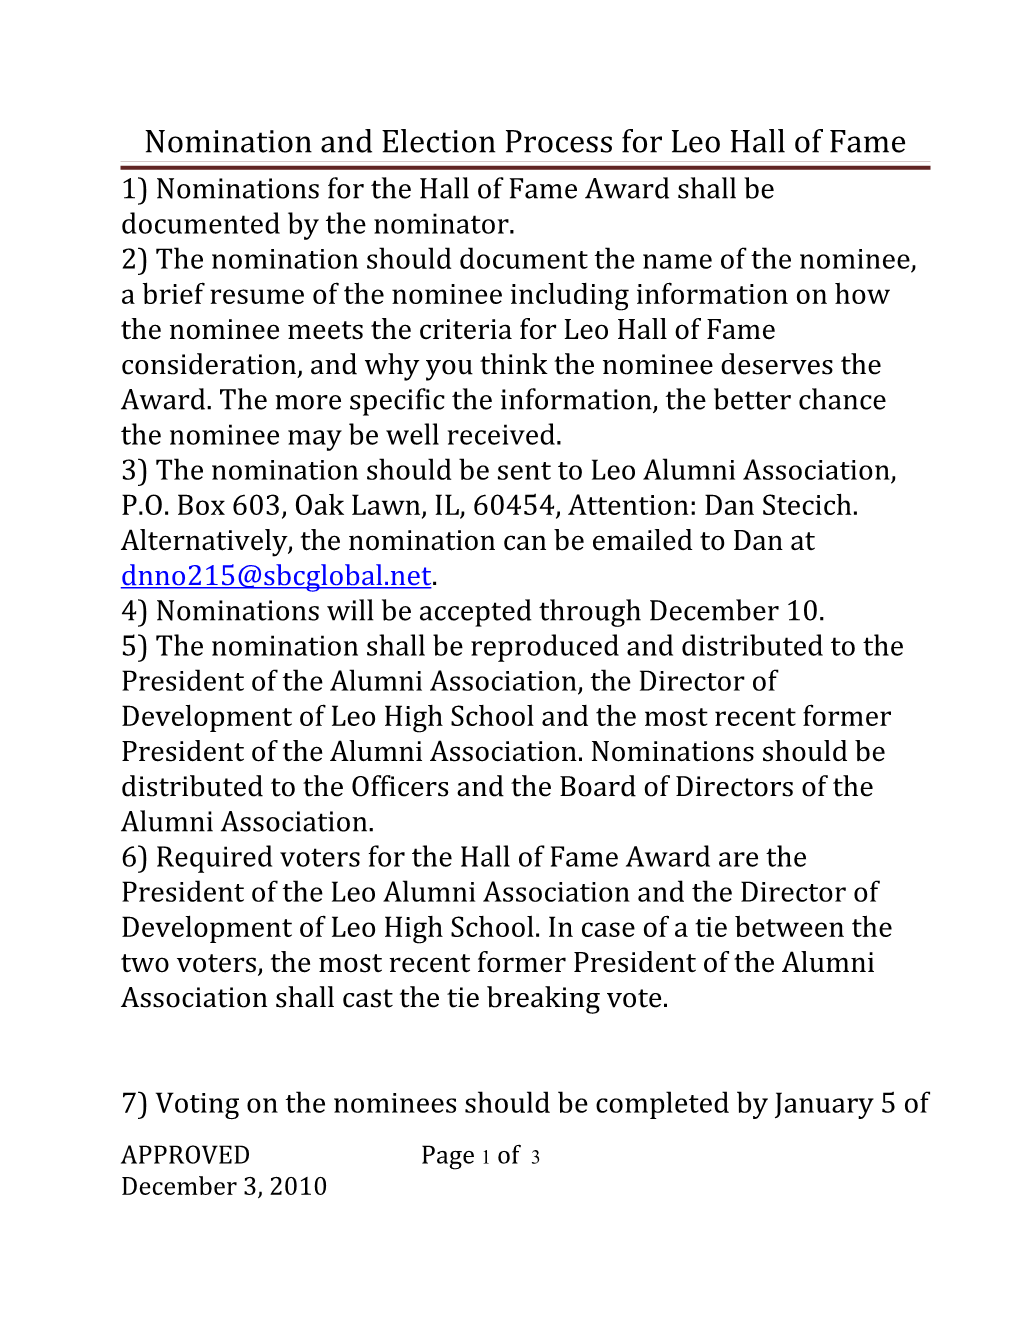 Nomination and Election Process for Leo Hall of Fame